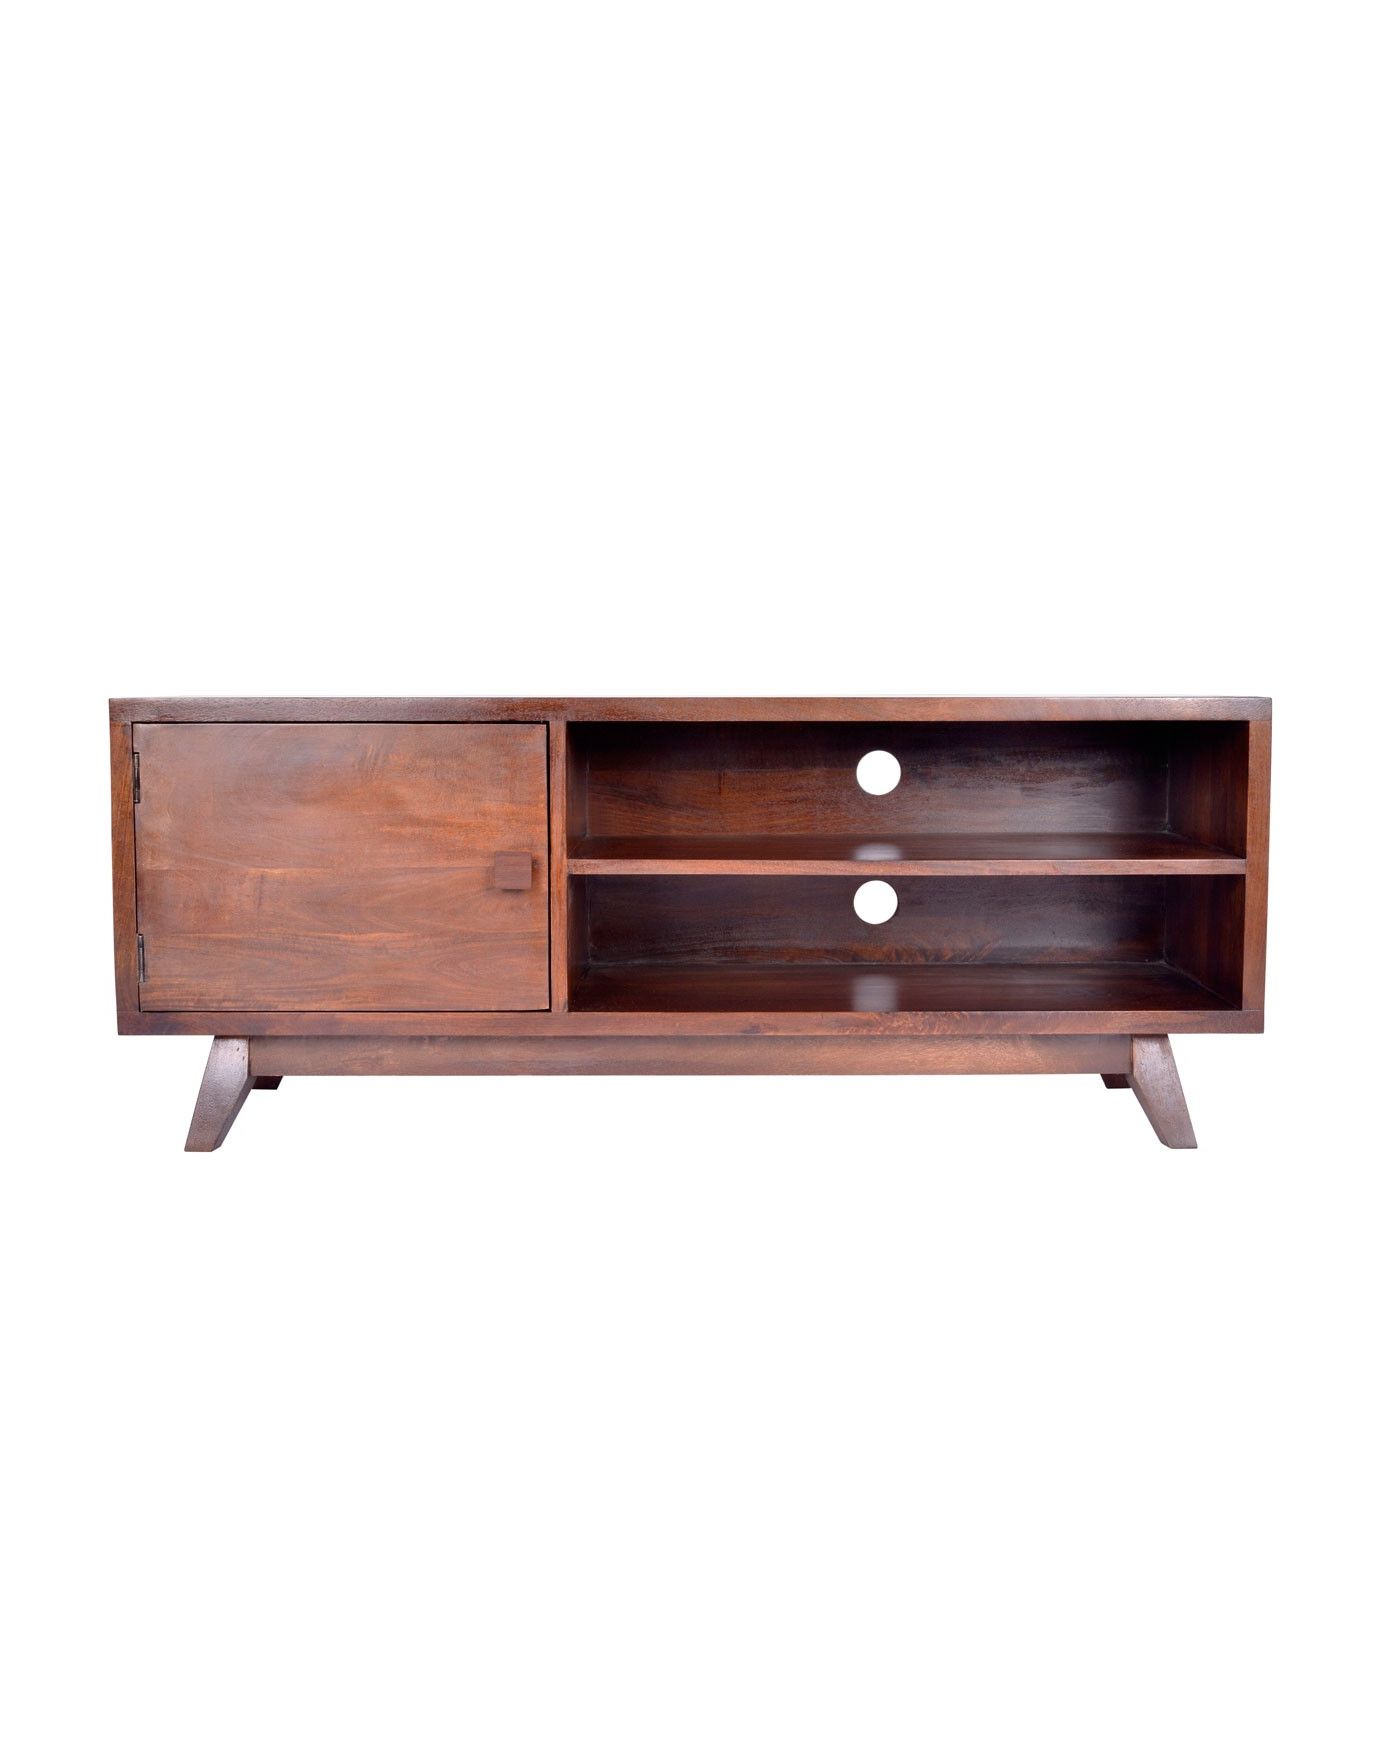 [%dark Wood Tv Stand With Shelf Retro Design 100% Solid Wood – Homescapes In Most Up To Date Hard Wood Tv Stands|hard Wood Tv Stands Throughout Preferred Dark Wood Tv Stand With Shelf Retro Design 100% Solid Wood – Homescapes|most Recent Hard Wood Tv Stands Intended For Dark Wood Tv Stand With Shelf Retro Design 100% Solid Wood – Homescapes|well Known Dark Wood Tv Stand With Shelf Retro Design 100% Solid Wood – Homescapes Within Hard Wood Tv Stands%] (Photo 13 of 20)